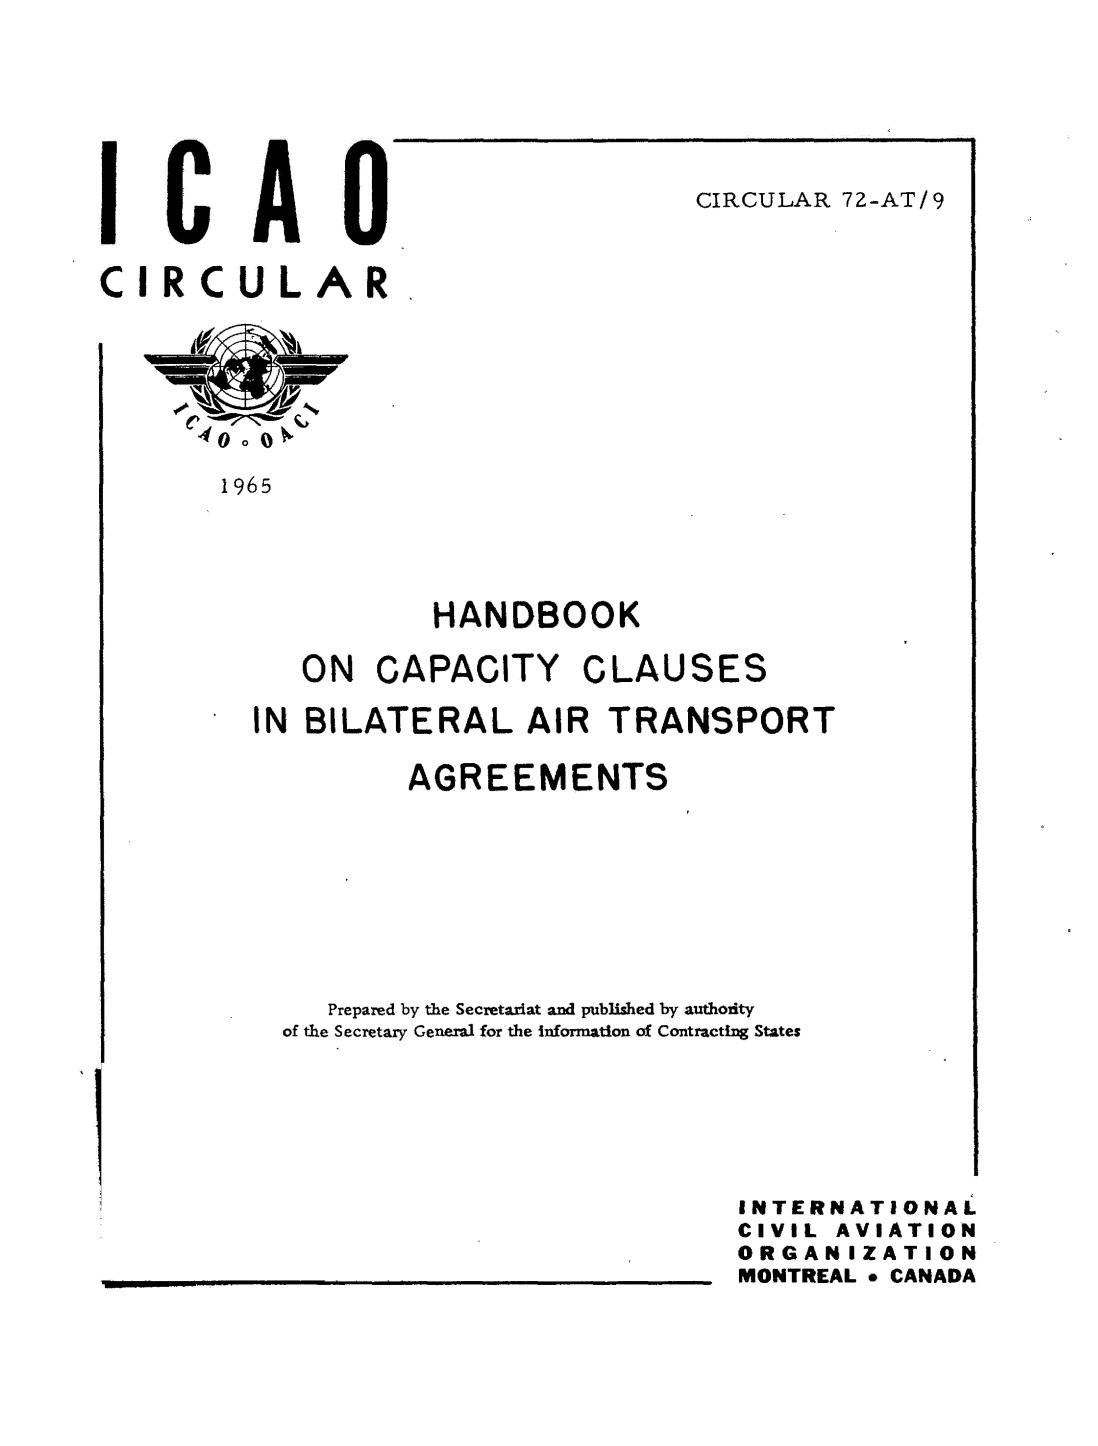 Cir 72 HANDBOOK  ON CAPACITY CLAUSES  IN BILATERAL AIR TRANSPORT  AGREEMENTS